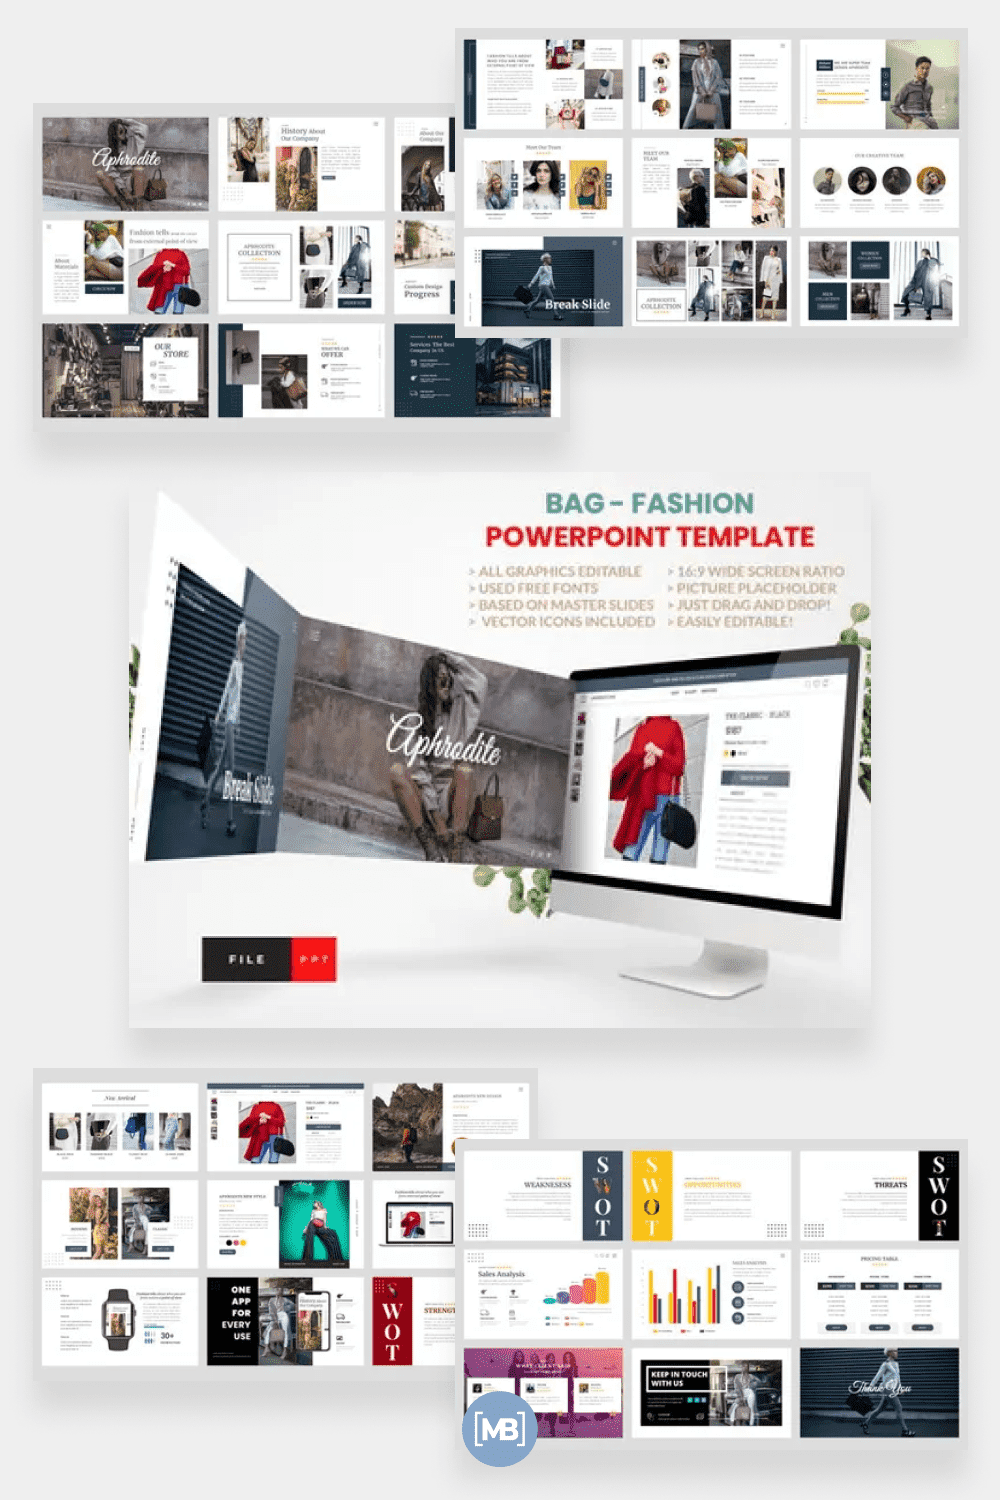 Bag - fashion PowerPoint template.